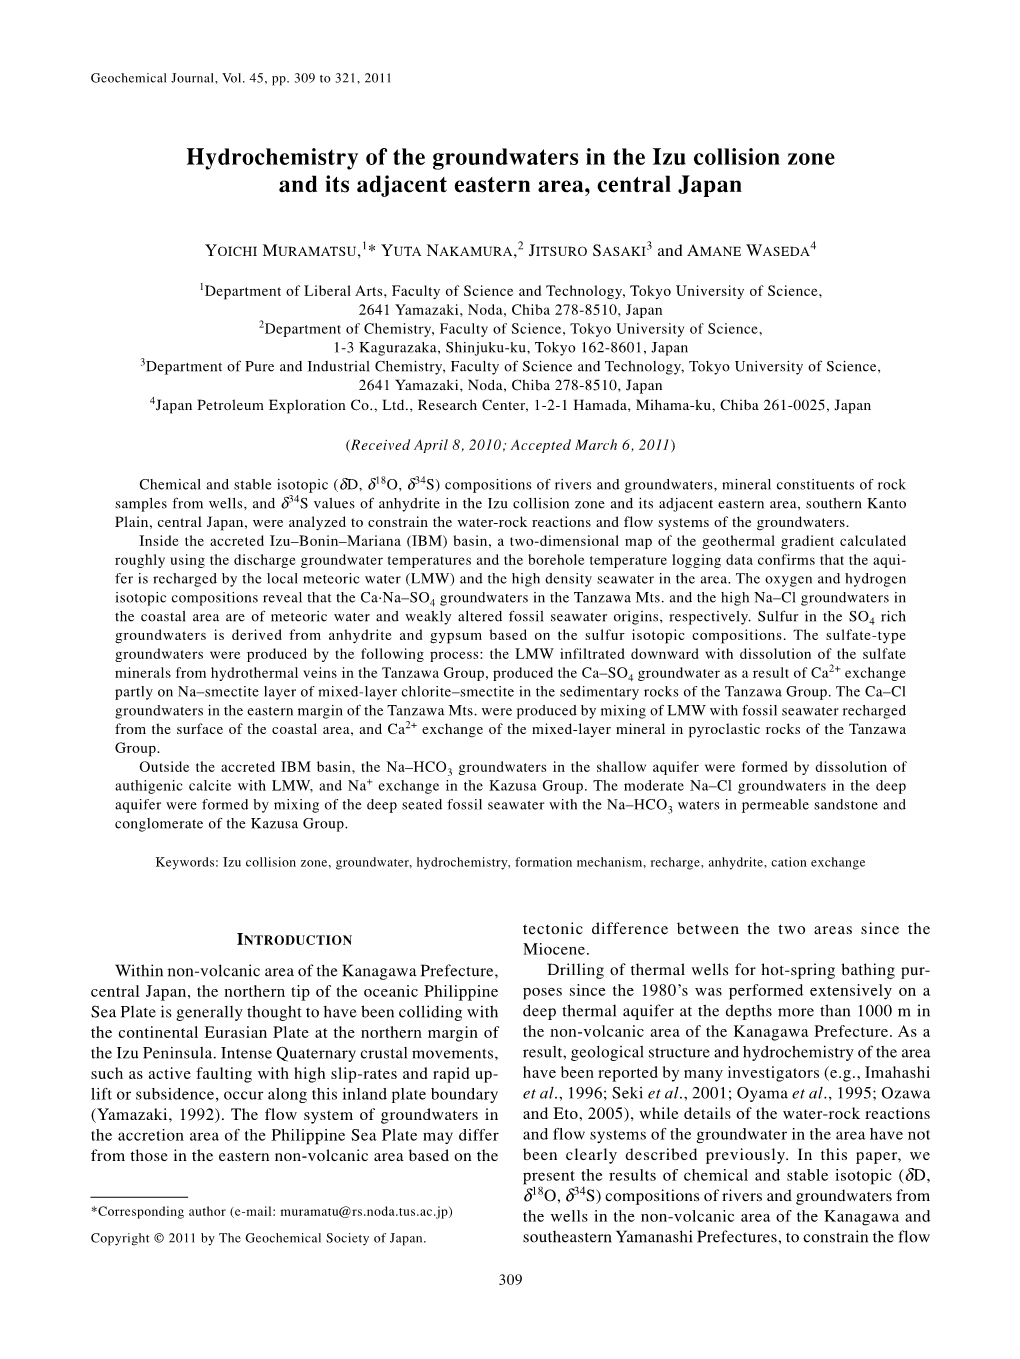 Hydrochemistry of the Groundwaters in the Izu Collision Zone and Its Adjacent Eastern Area, Central Japan